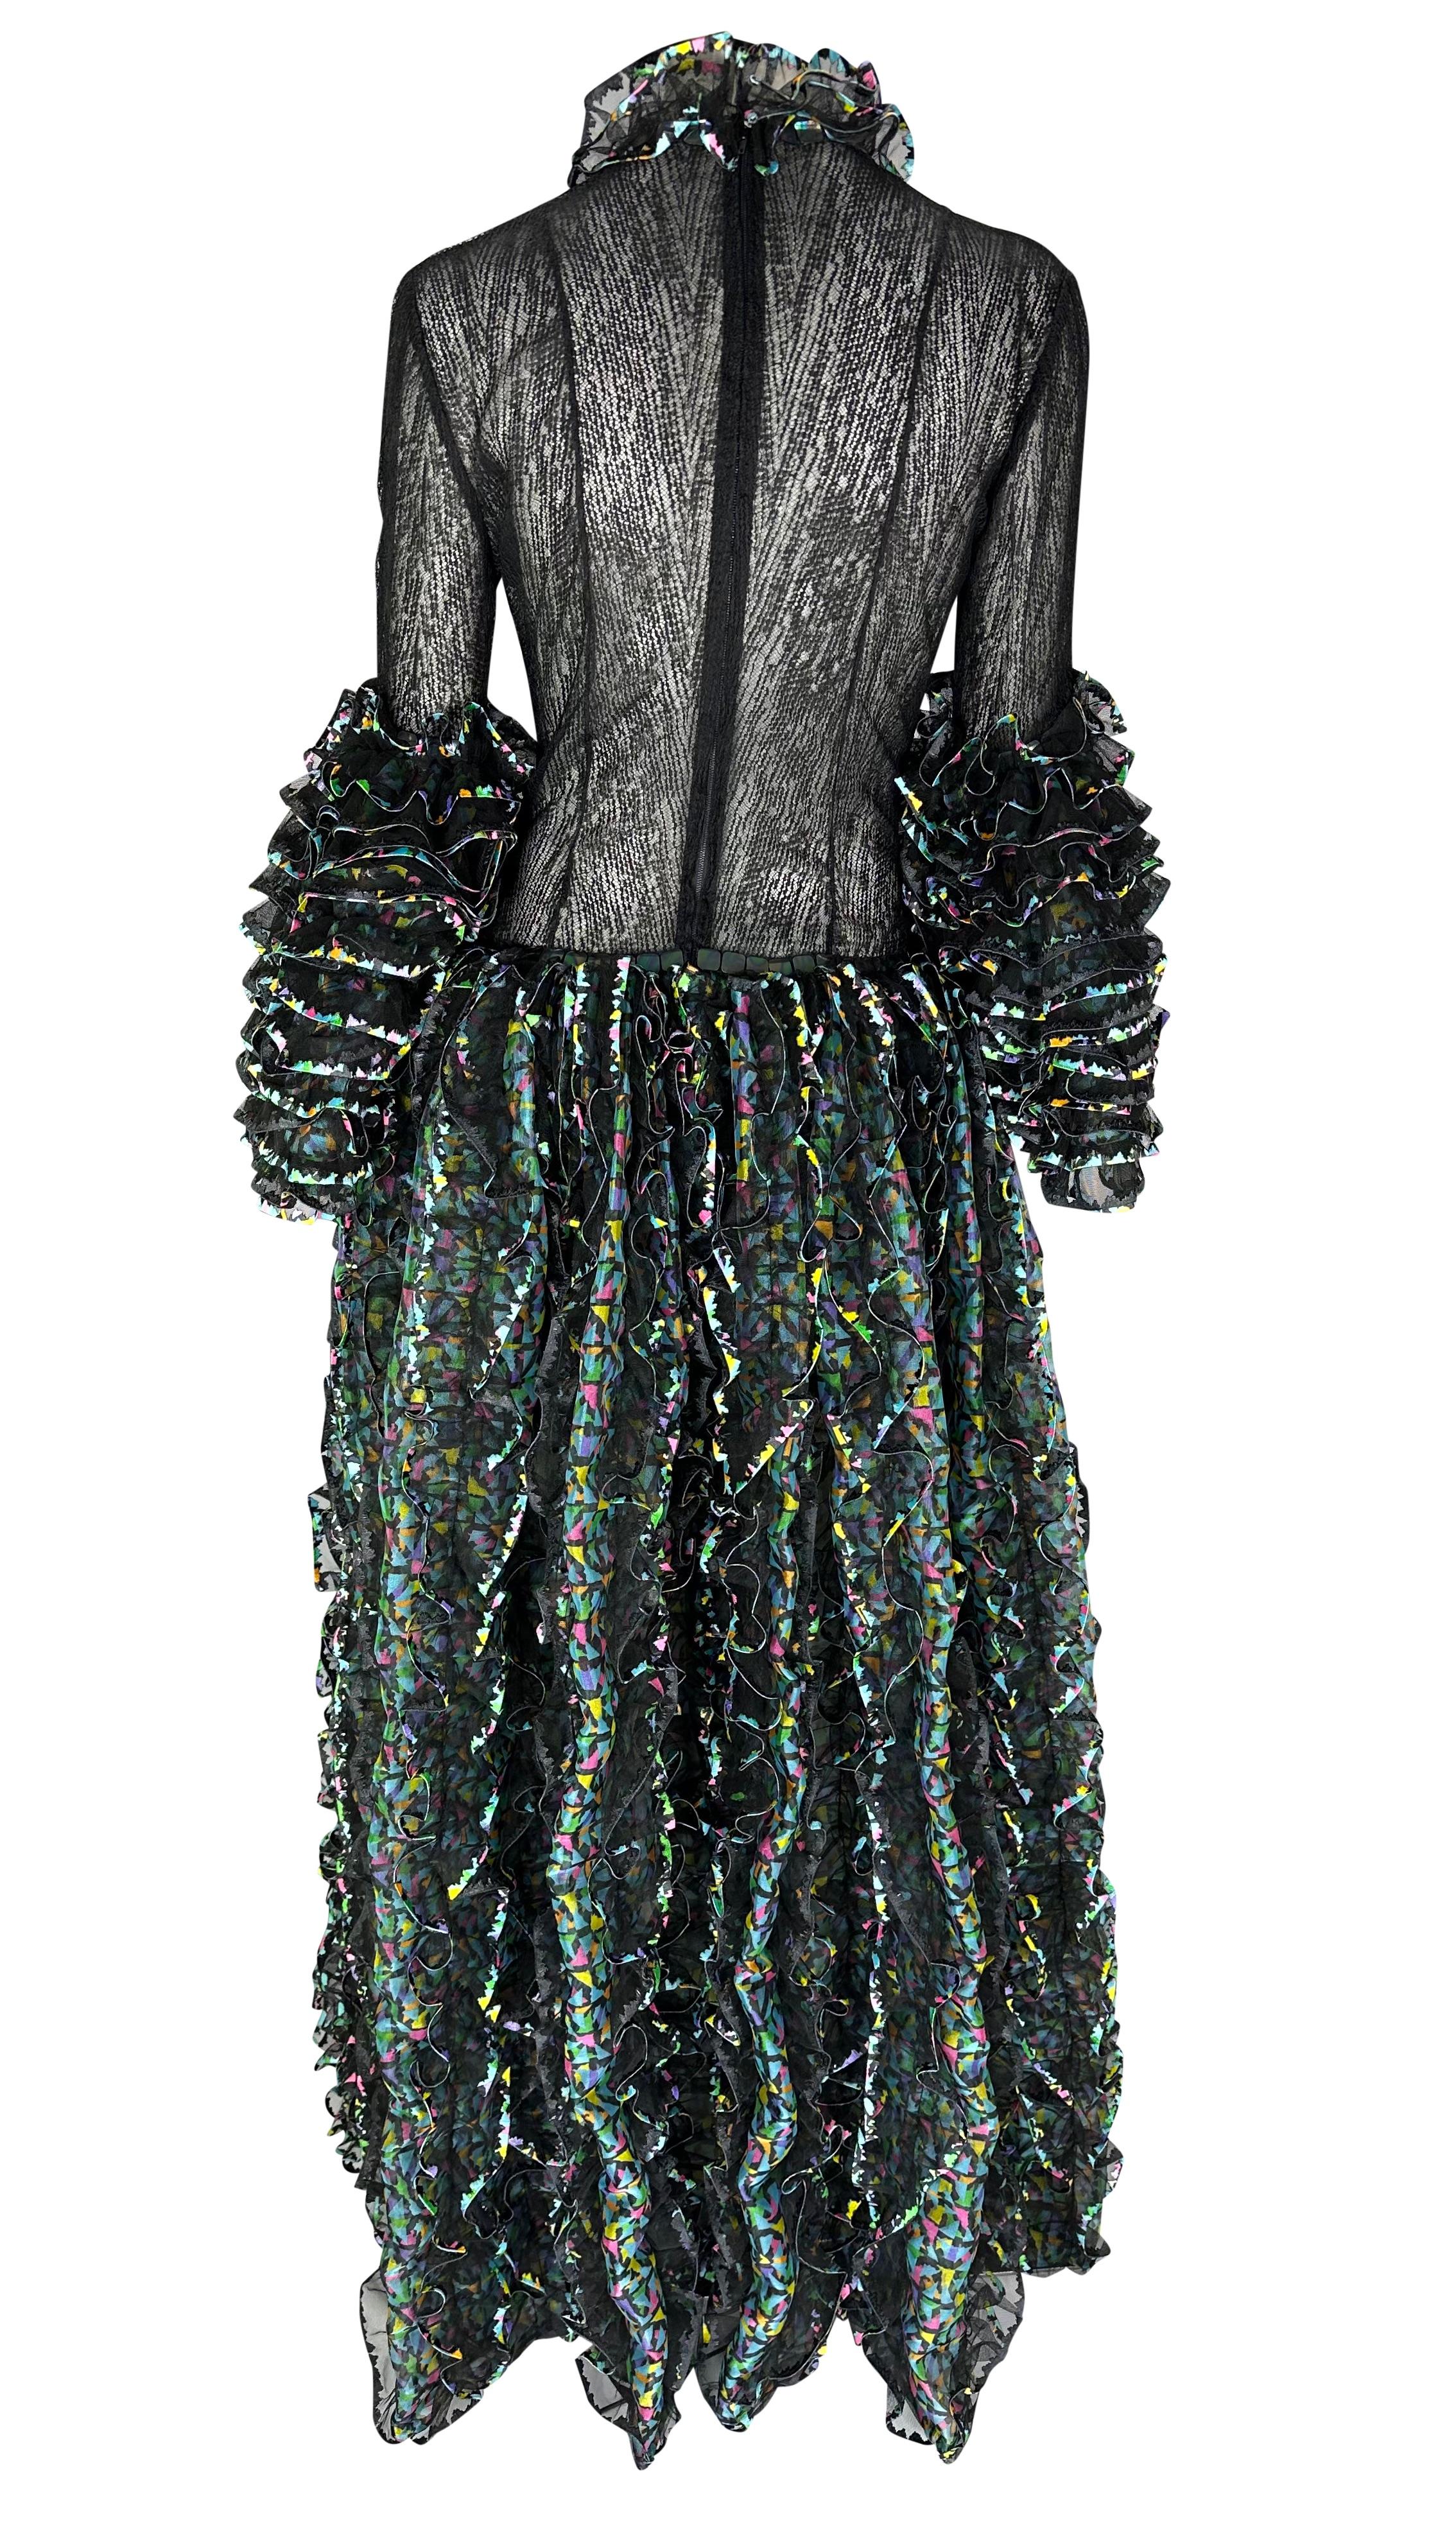 S/S 1987 Paco Rabanne Haute Couture Runway Sheer Embroidered Ruffle Gown For Sale 4